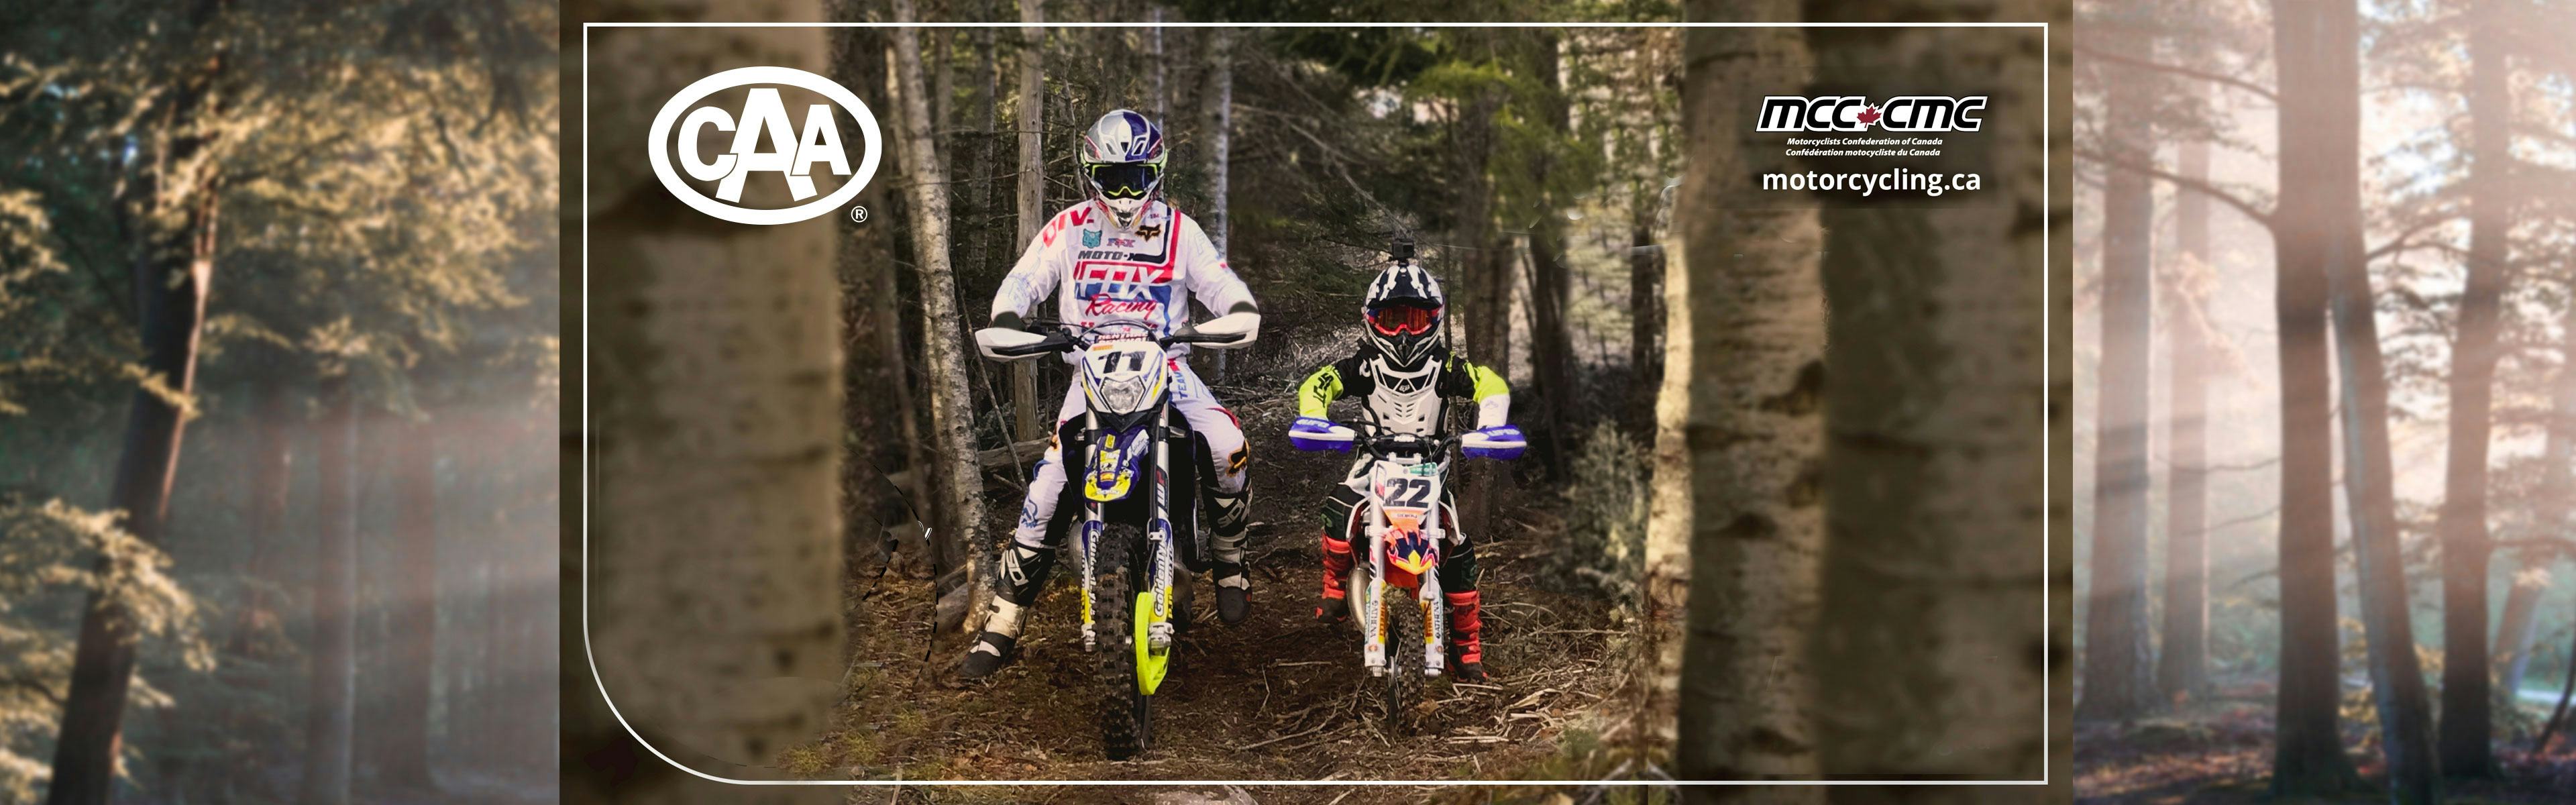 Adult and child motorcycling through a trail ﻿